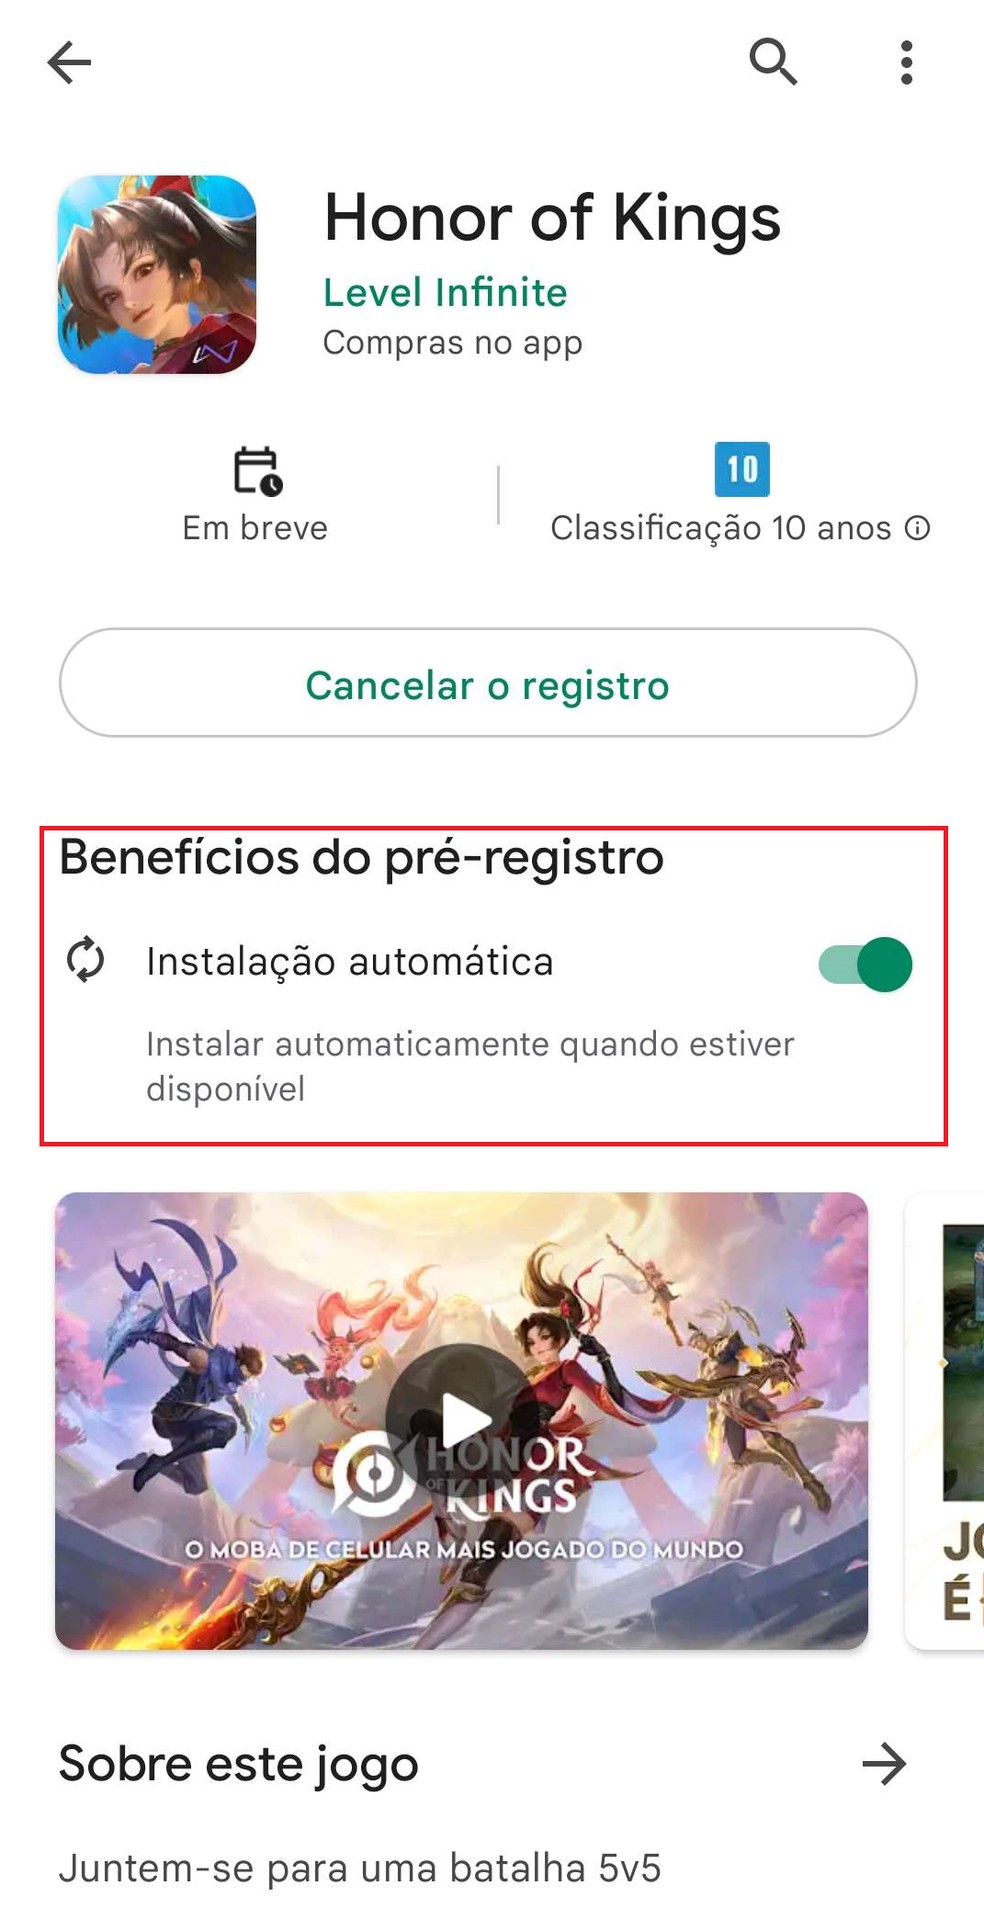 How To Download Honor of Kings - IOS